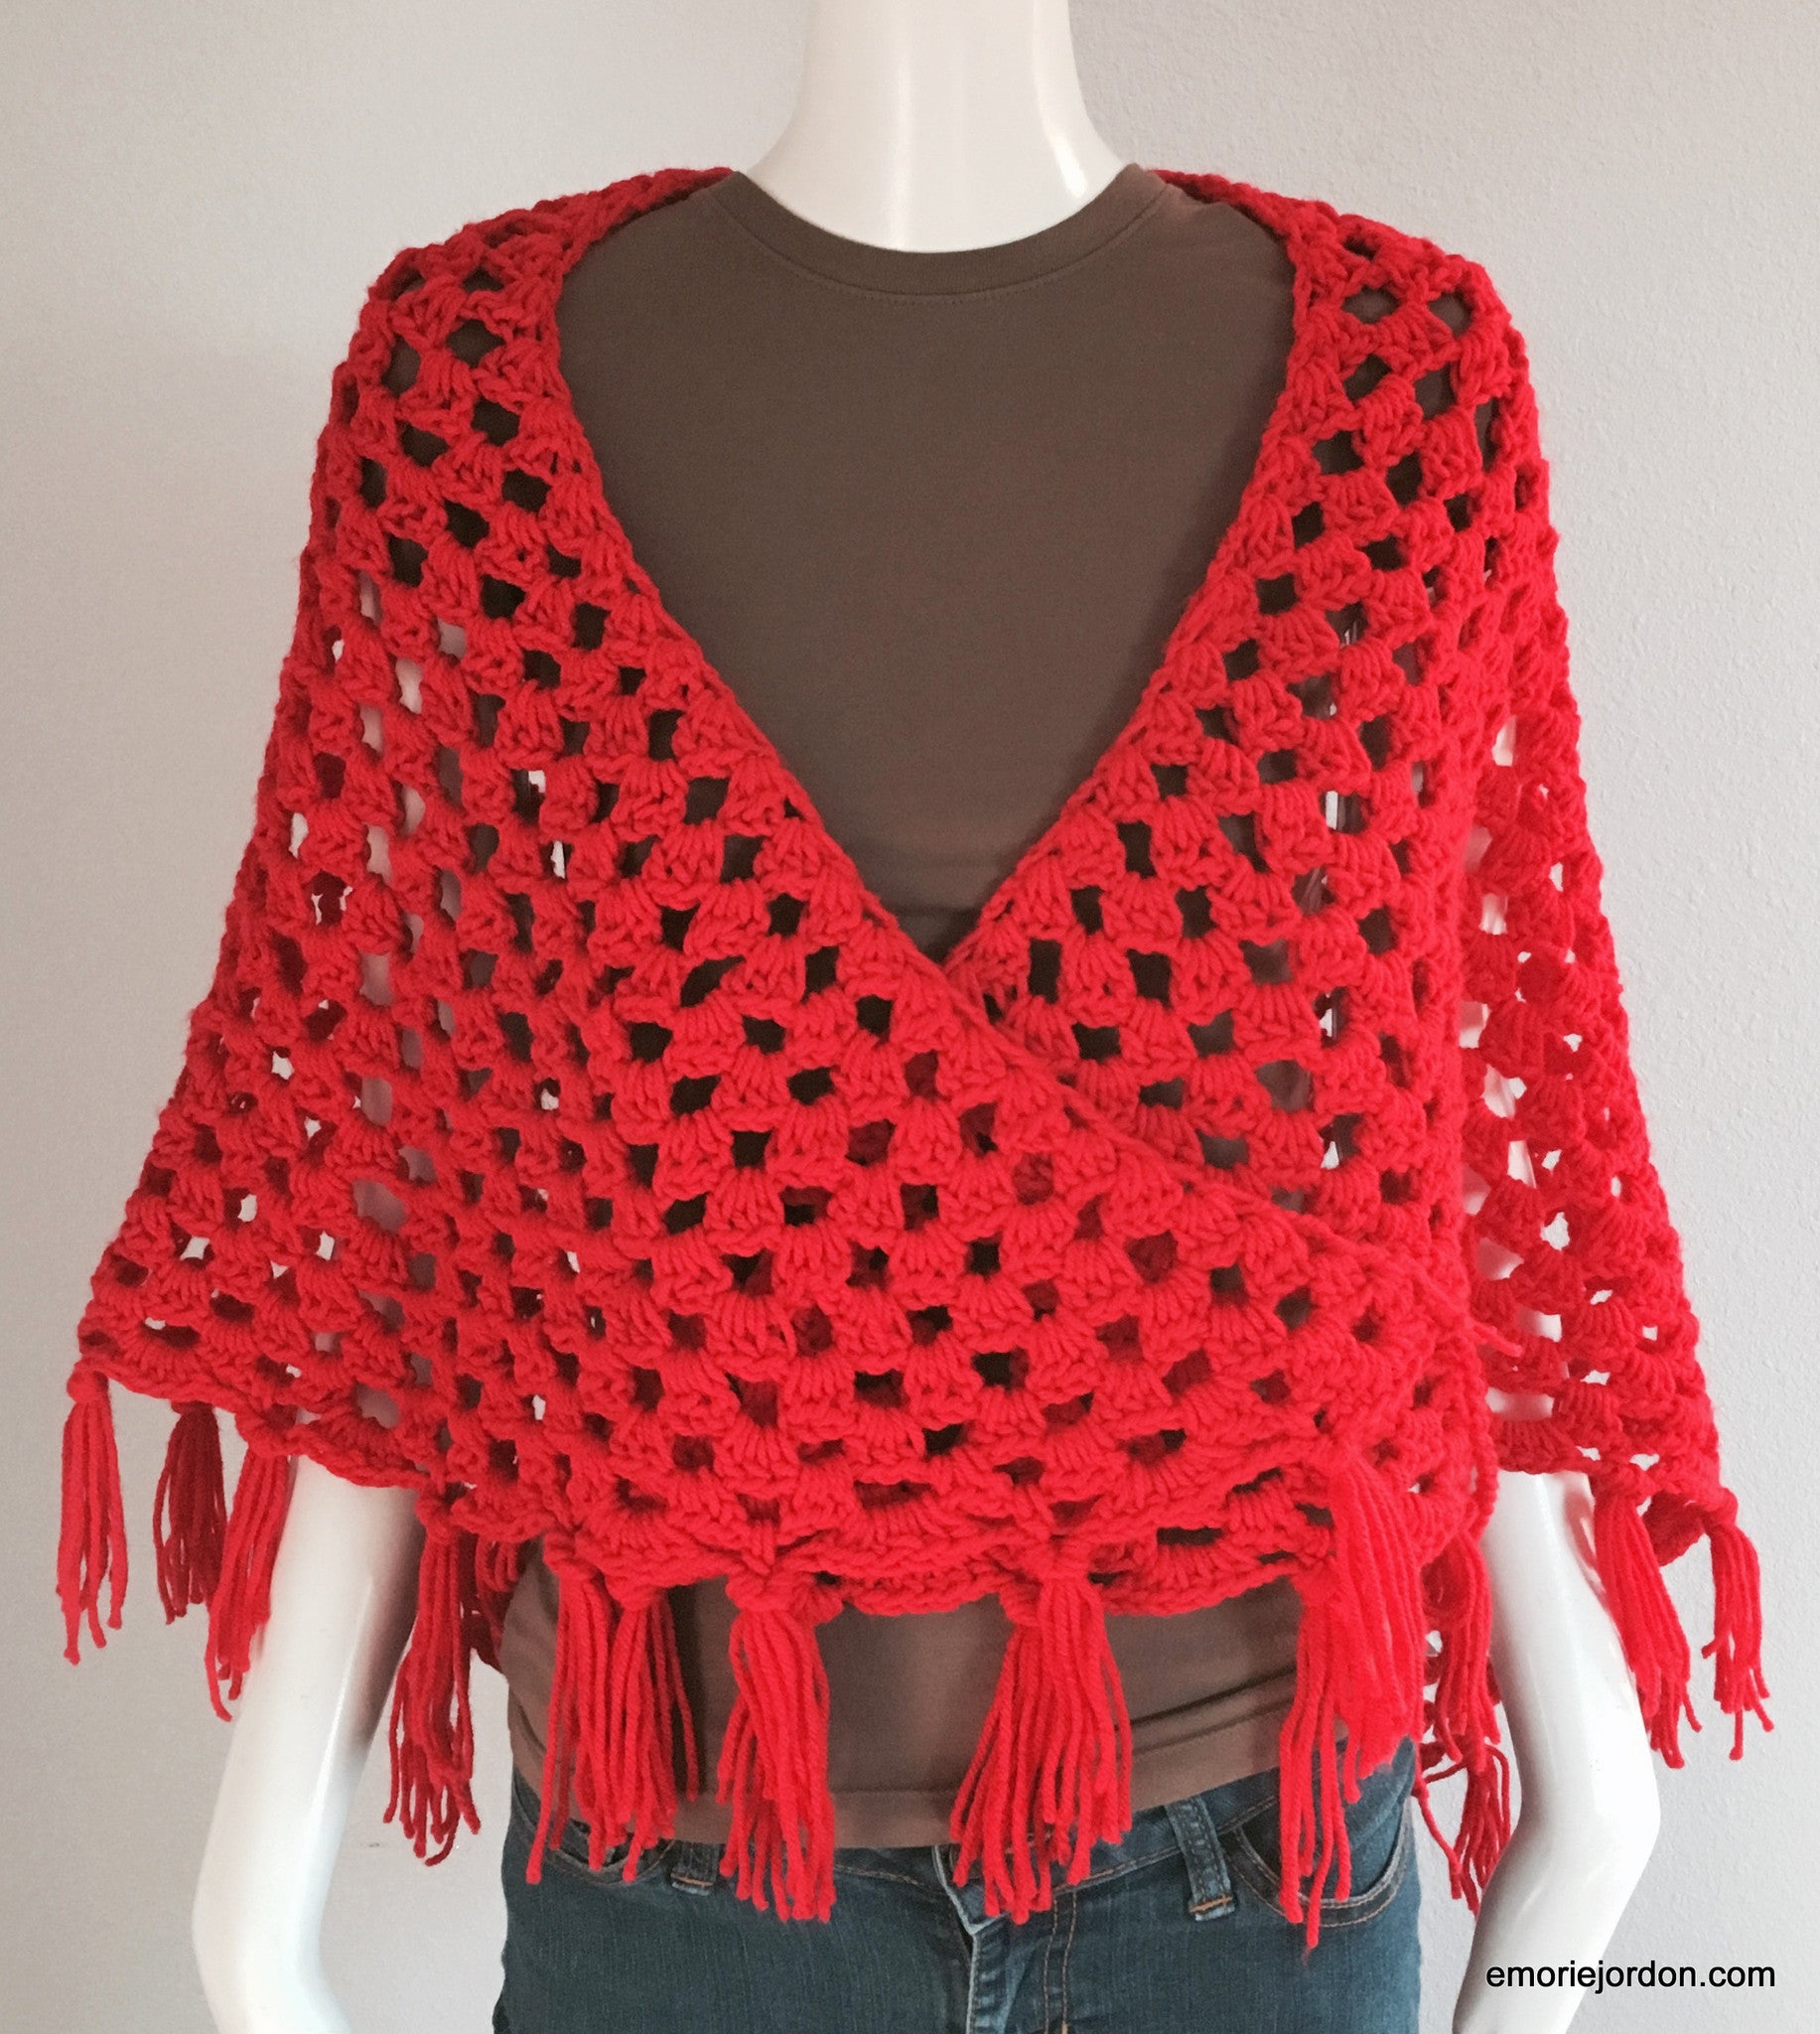 Vintage: Handmade Lady In Red Shawl